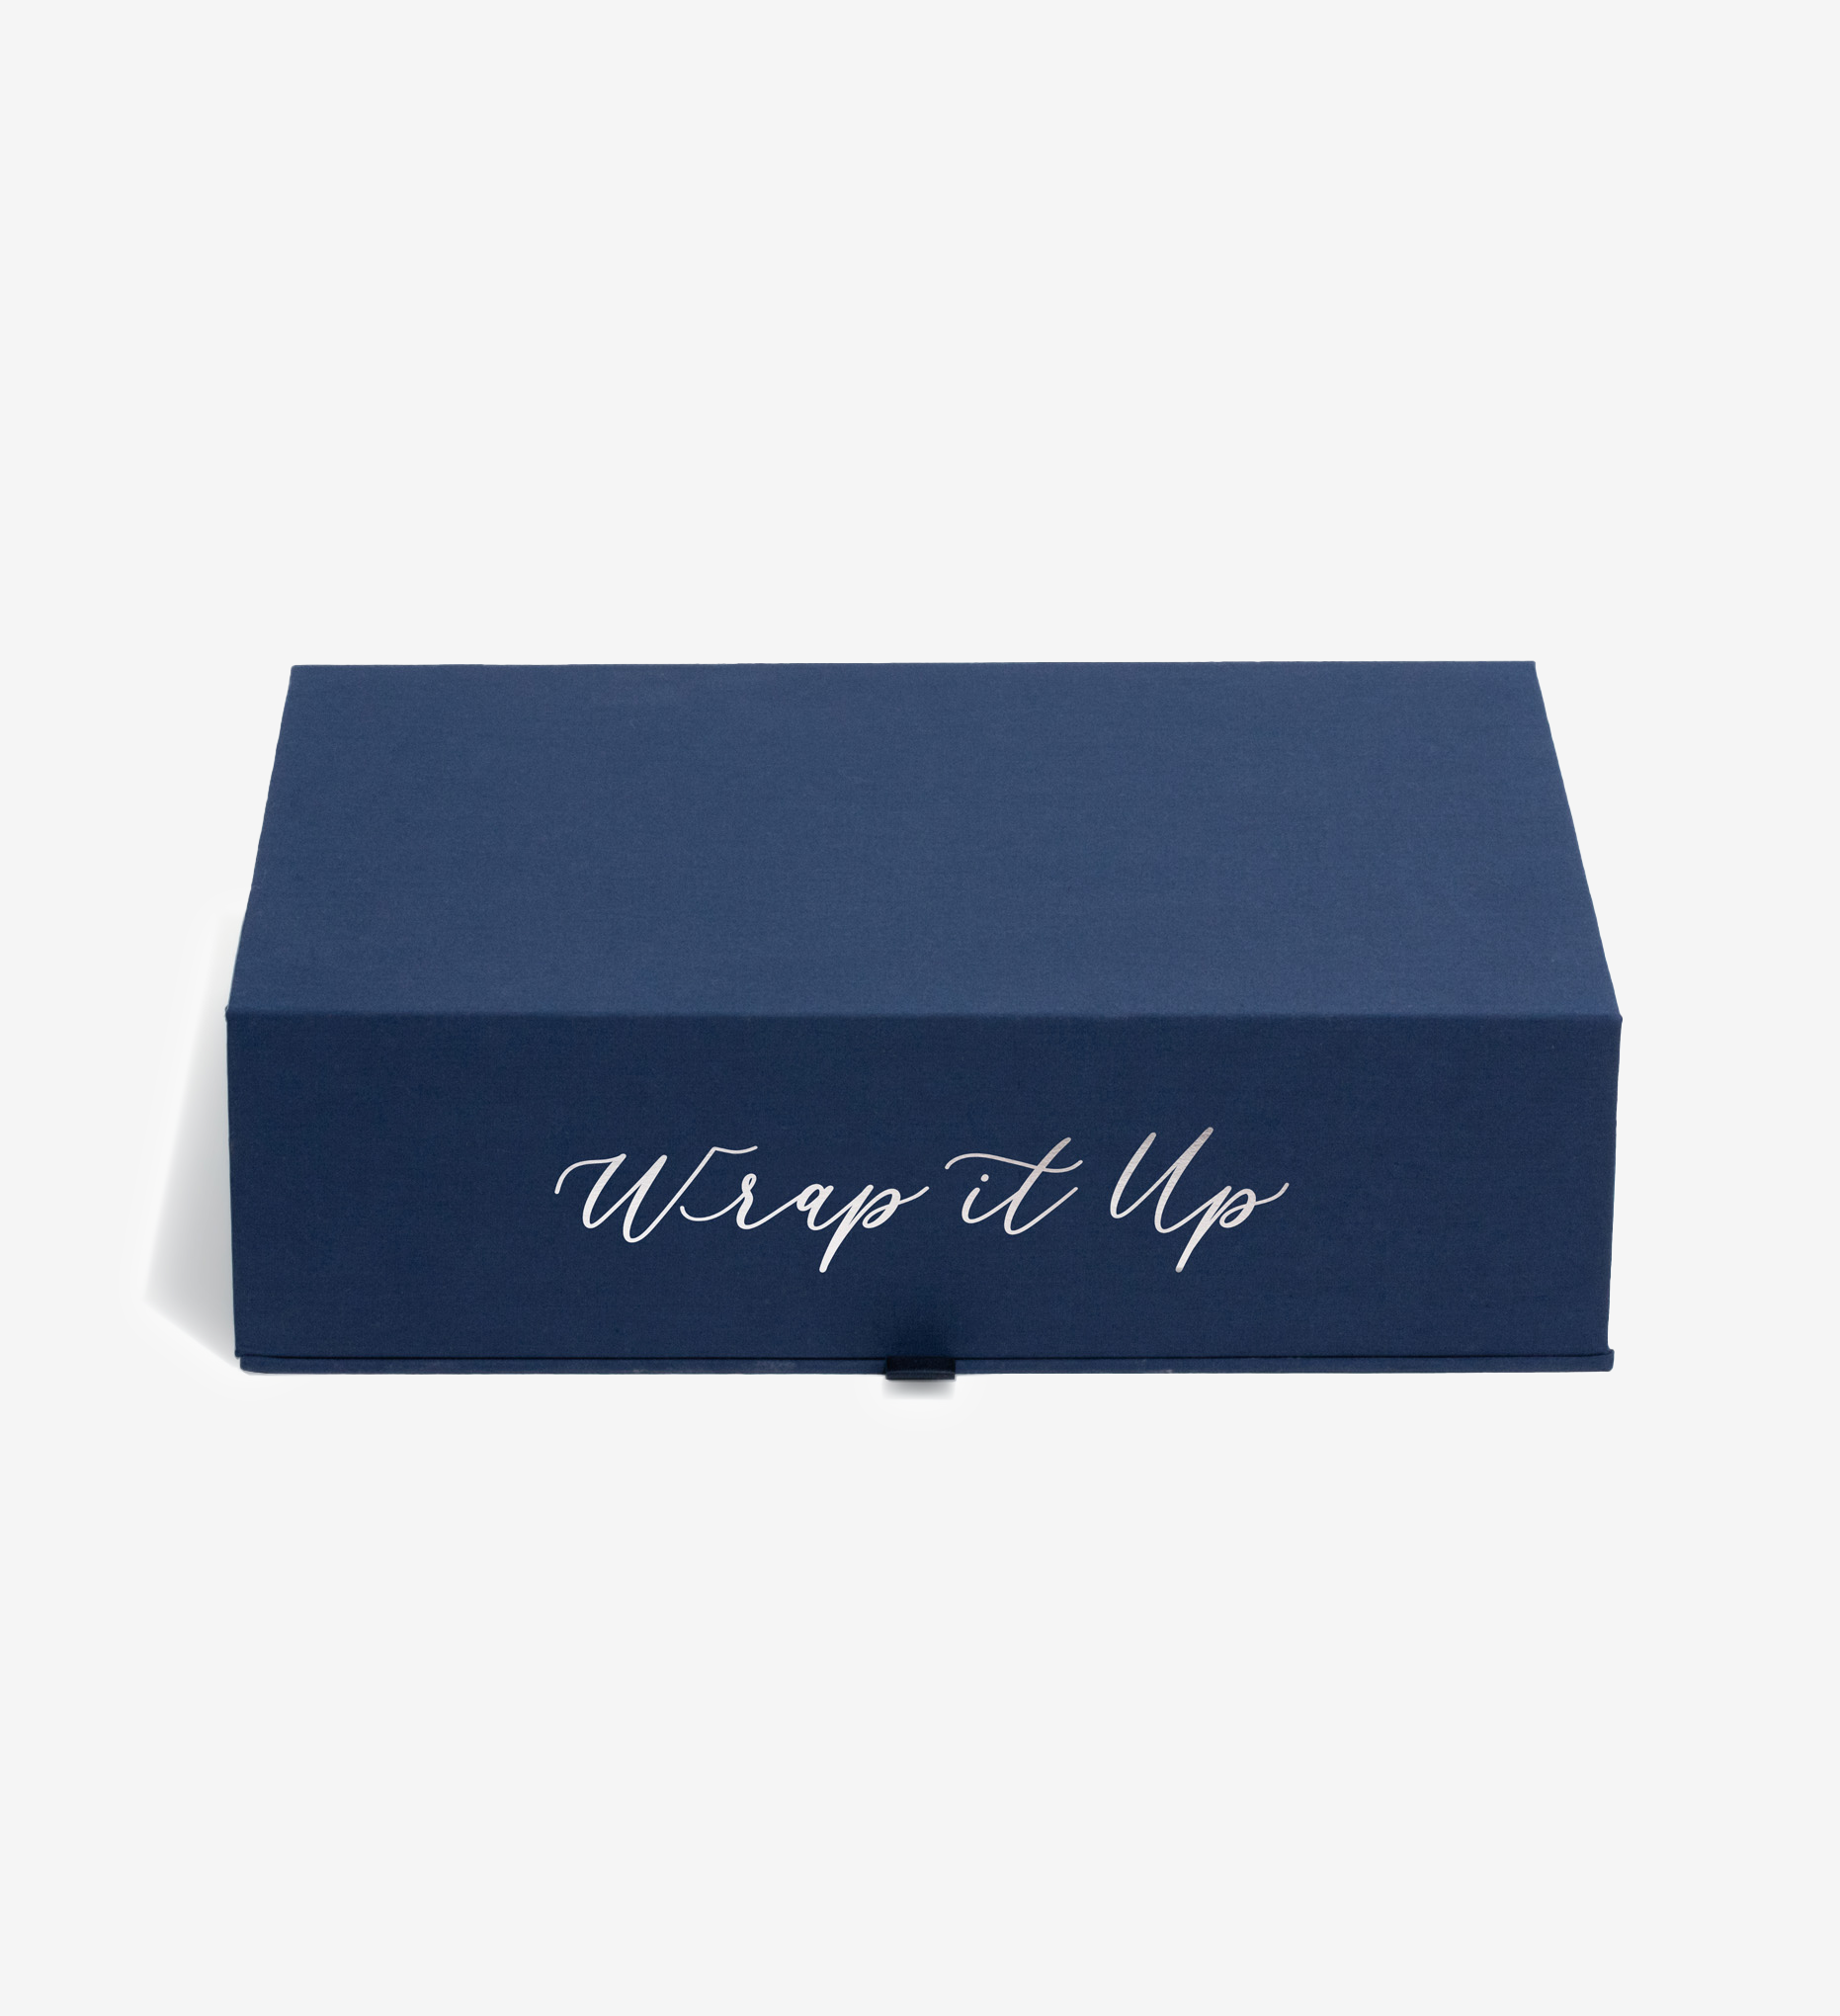 closed something blue safe deposit box personalized with wrap it up